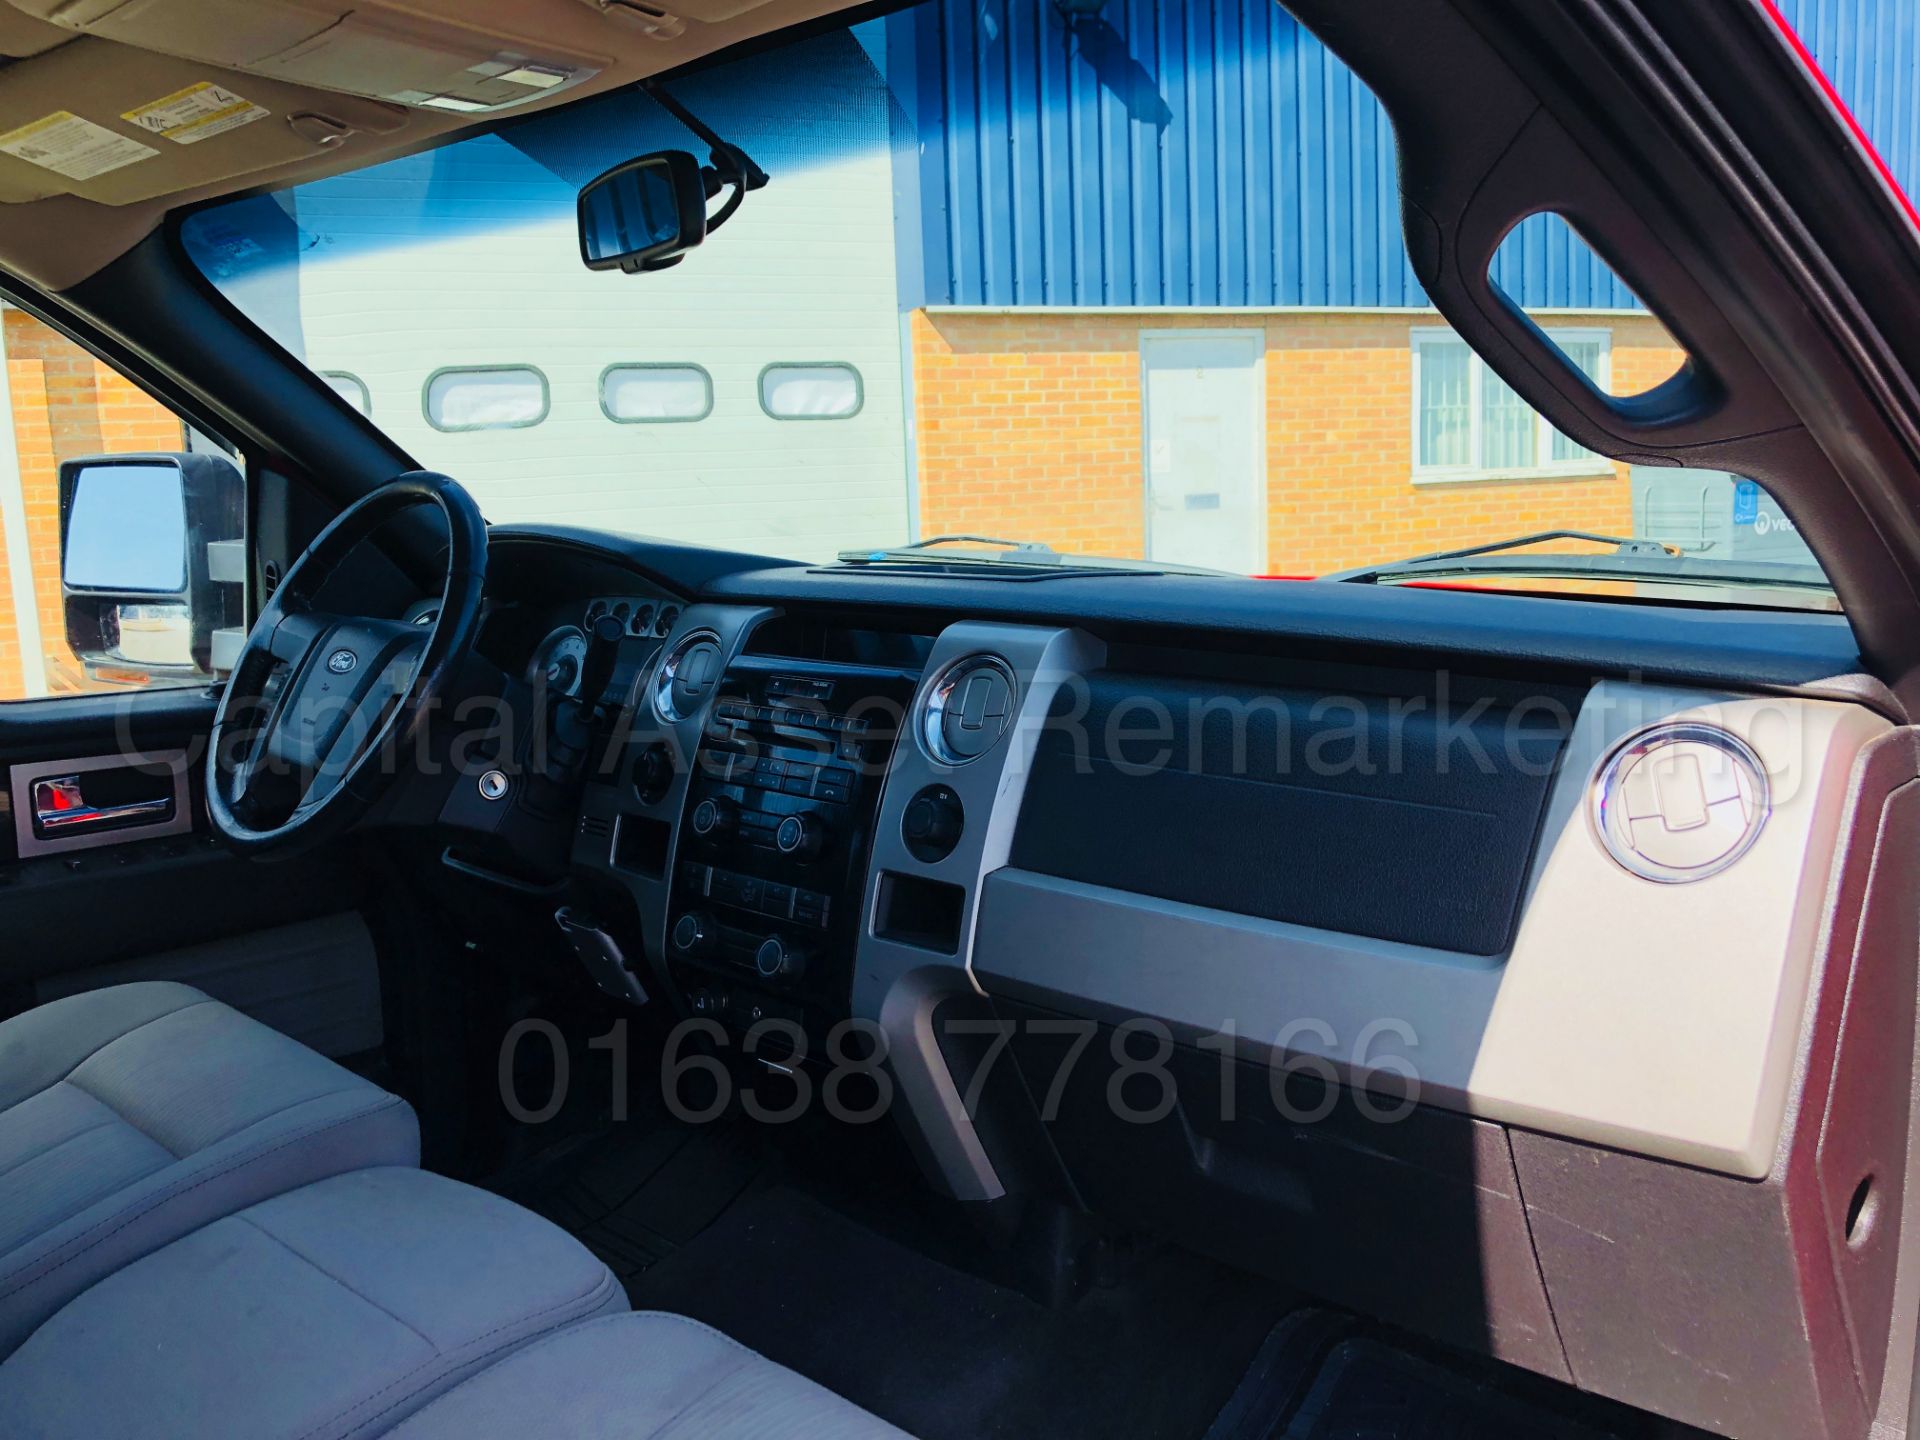 (On Sale) FORD F-150 **FX-4 EDITION** KING CAB '6 SEATER' (2010) '5.4L V8 - AUTO - 4X4' *HUGE SPEC* - Image 36 of 47